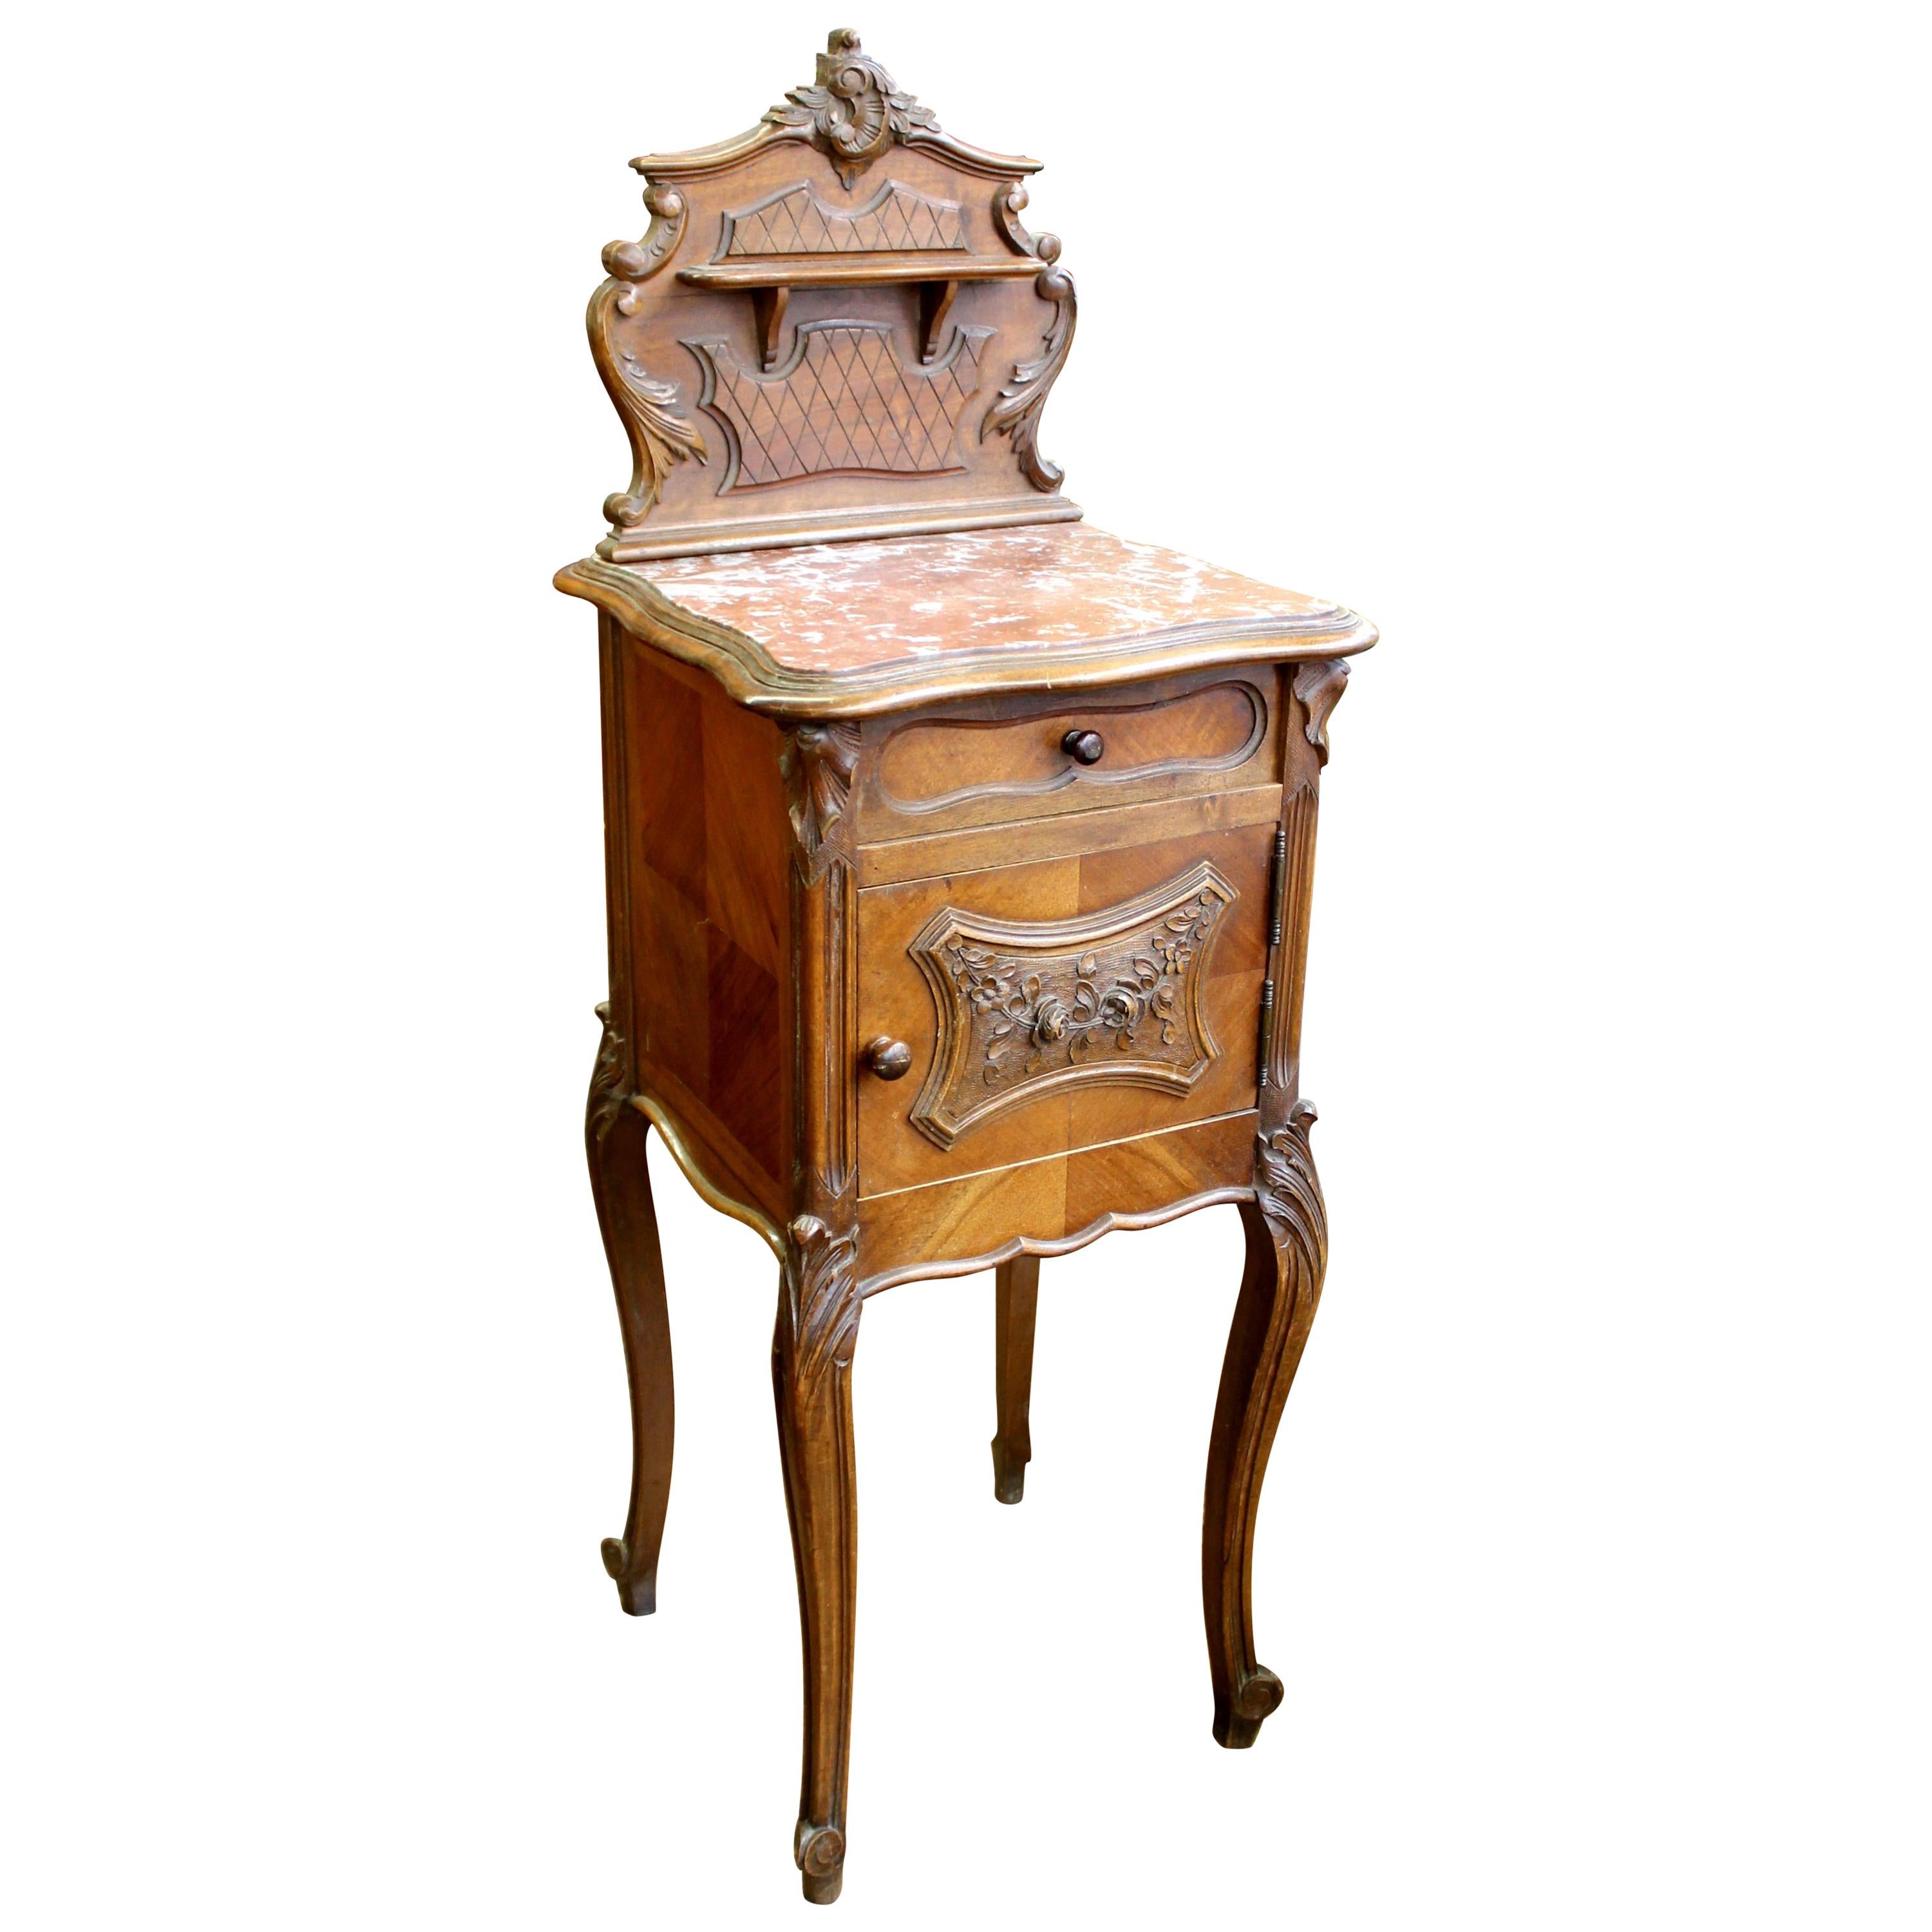 Antique French Hand-Carved Walnut Louis XV Style Marble-Top Bedside Table